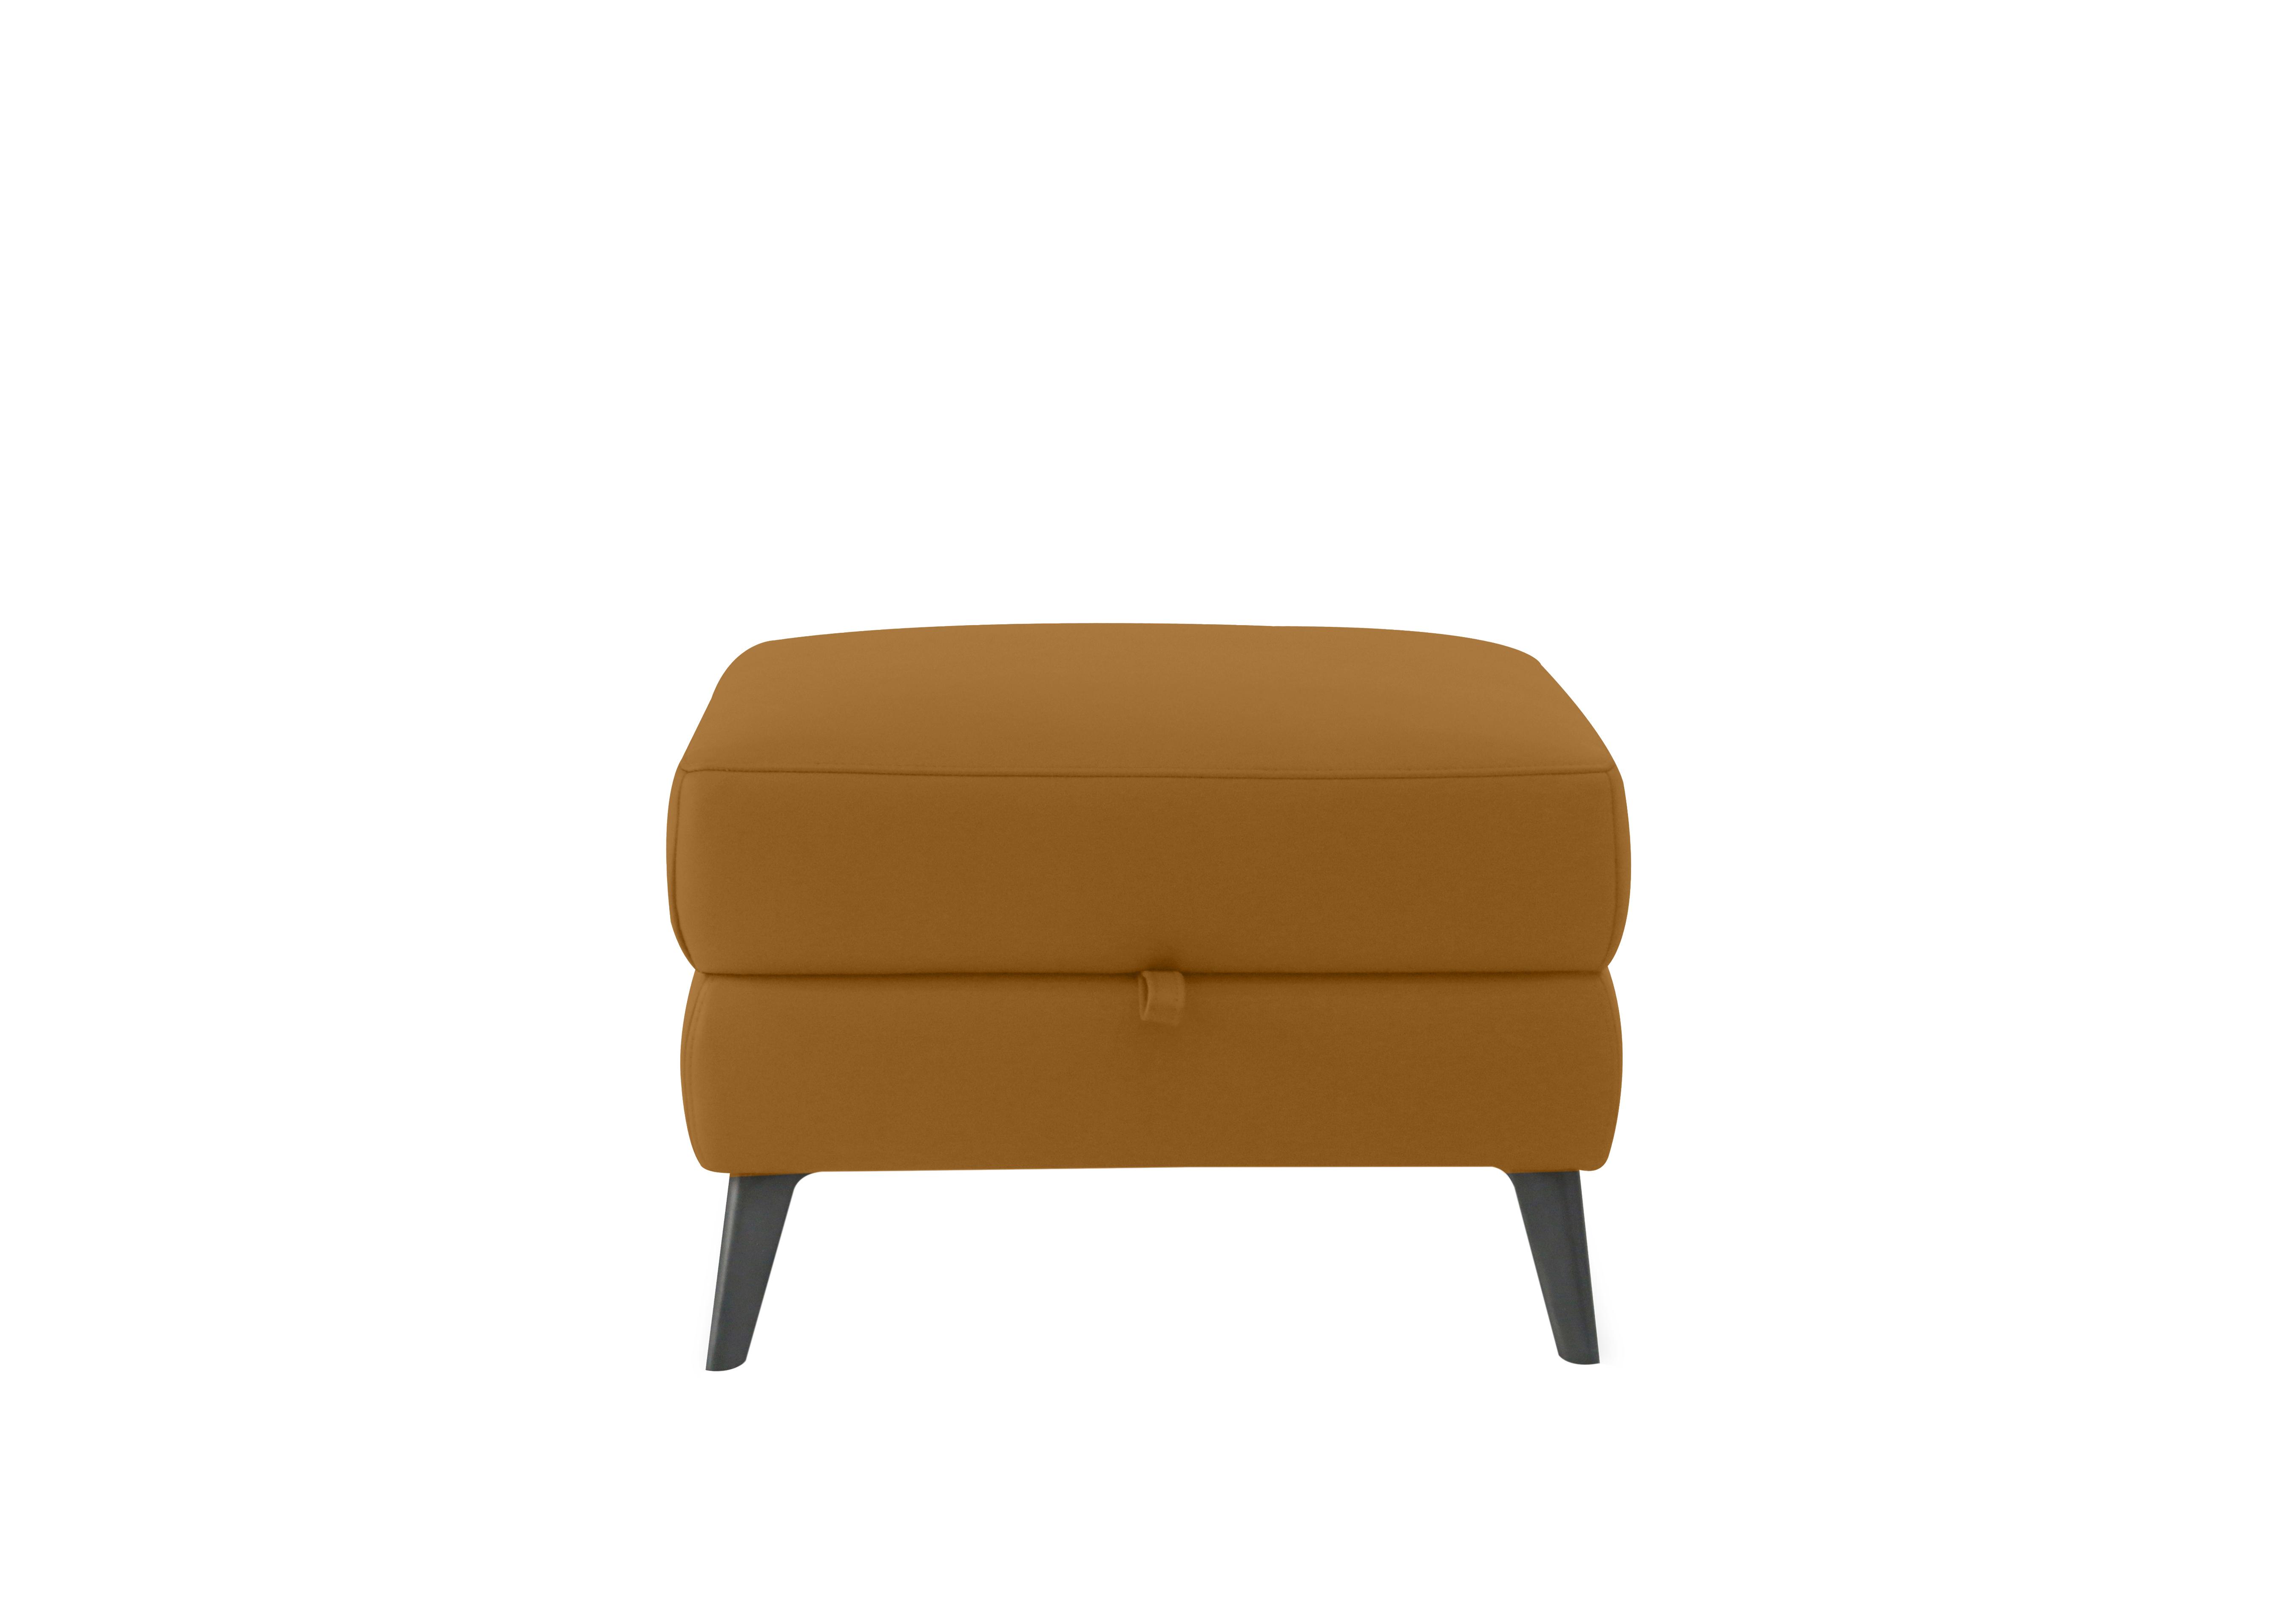 Maddox Leather Storage Footstool in Np-606e Honey Yellow on Furniture Village